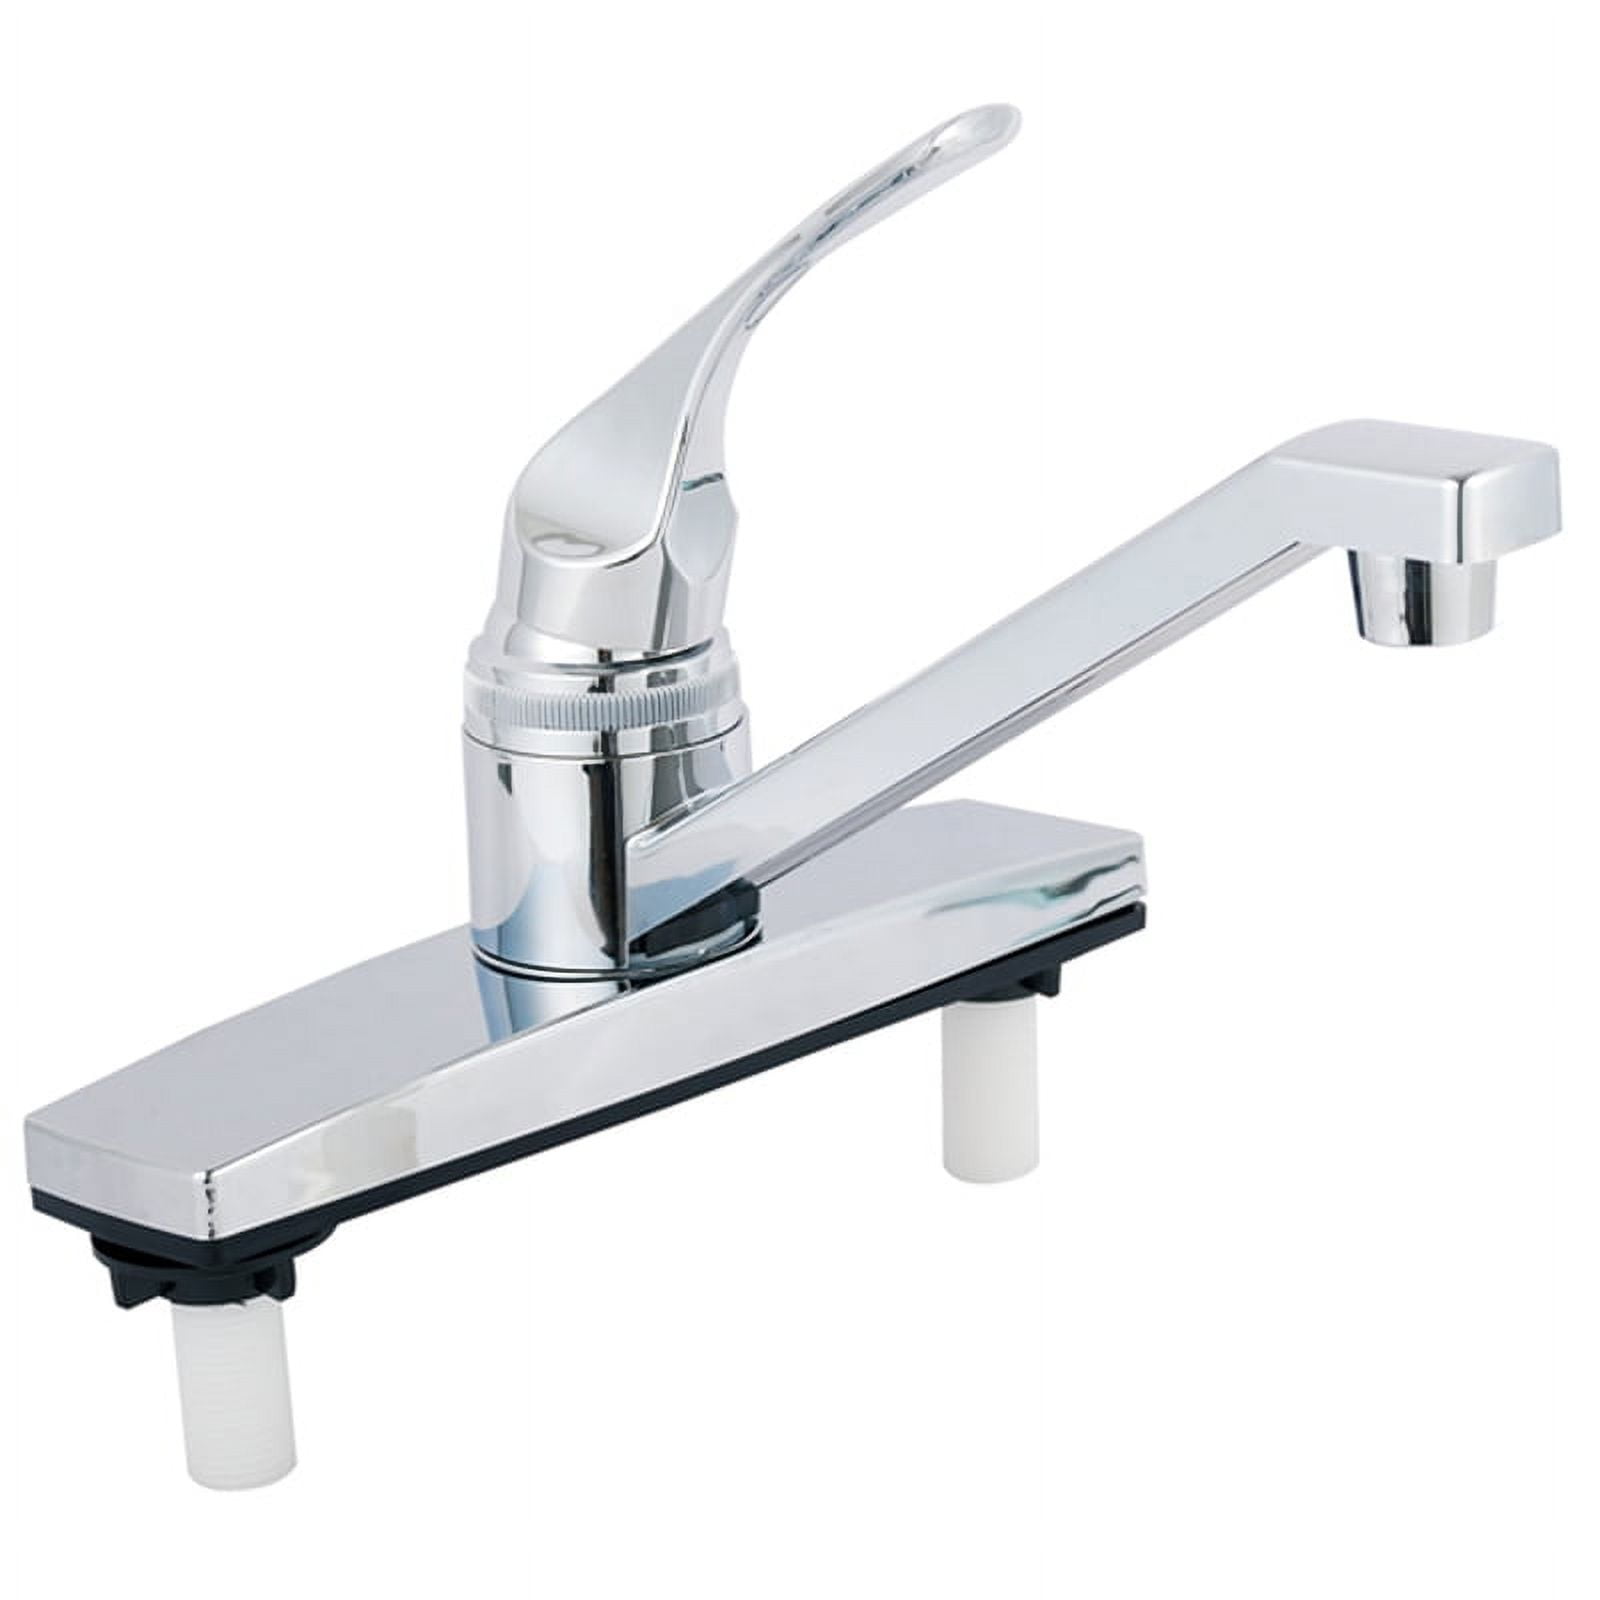 UPC 843518000076 product image for 45255 Traditional One Handle Chrome Kitchen Faucet | upcitemdb.com